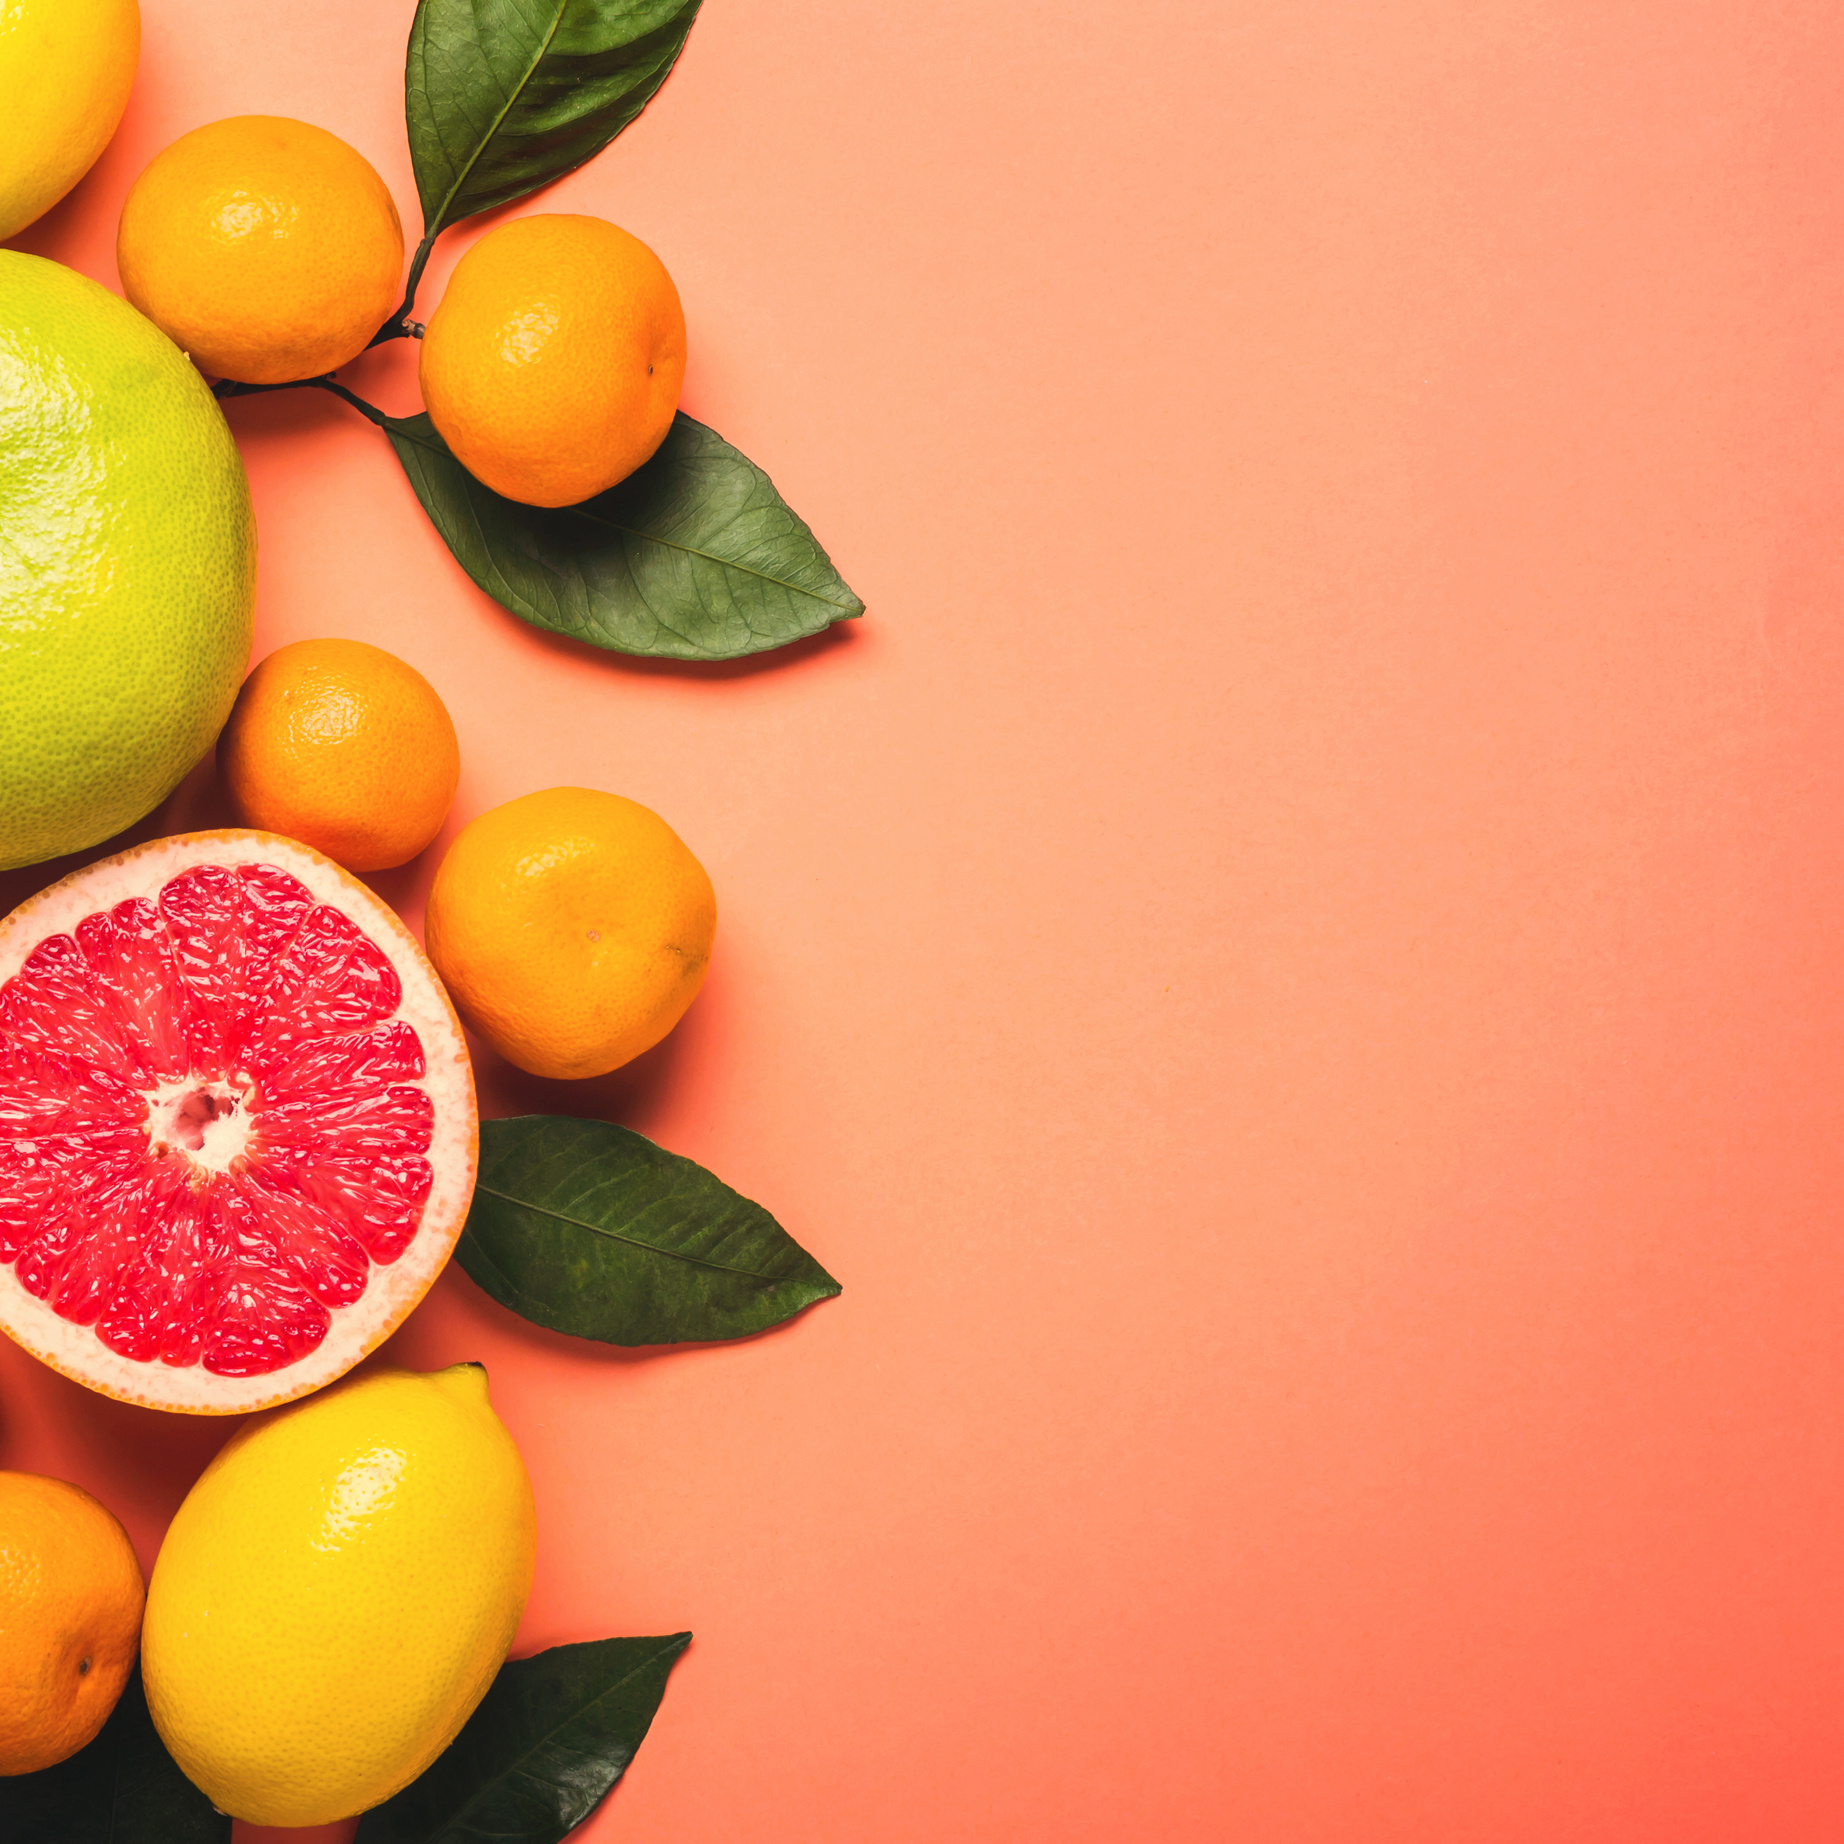 Healthy Food Living Coral Background. Citrus Fruit with Leaves. Color Trend 2019